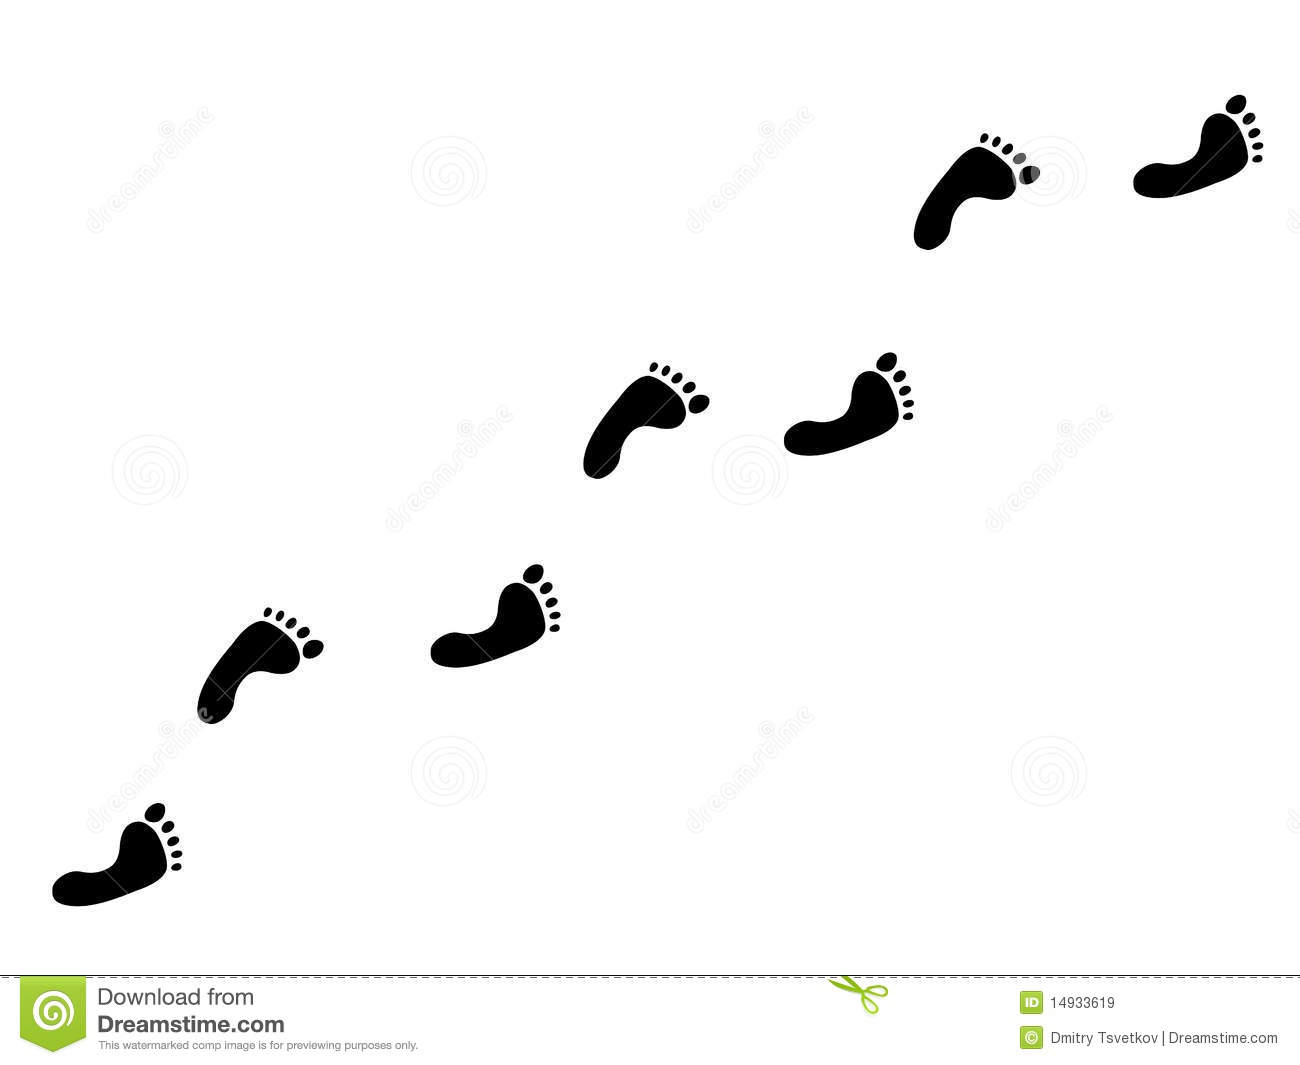 Illustration Of Human Footprints Black Silhouettes Path Or Way